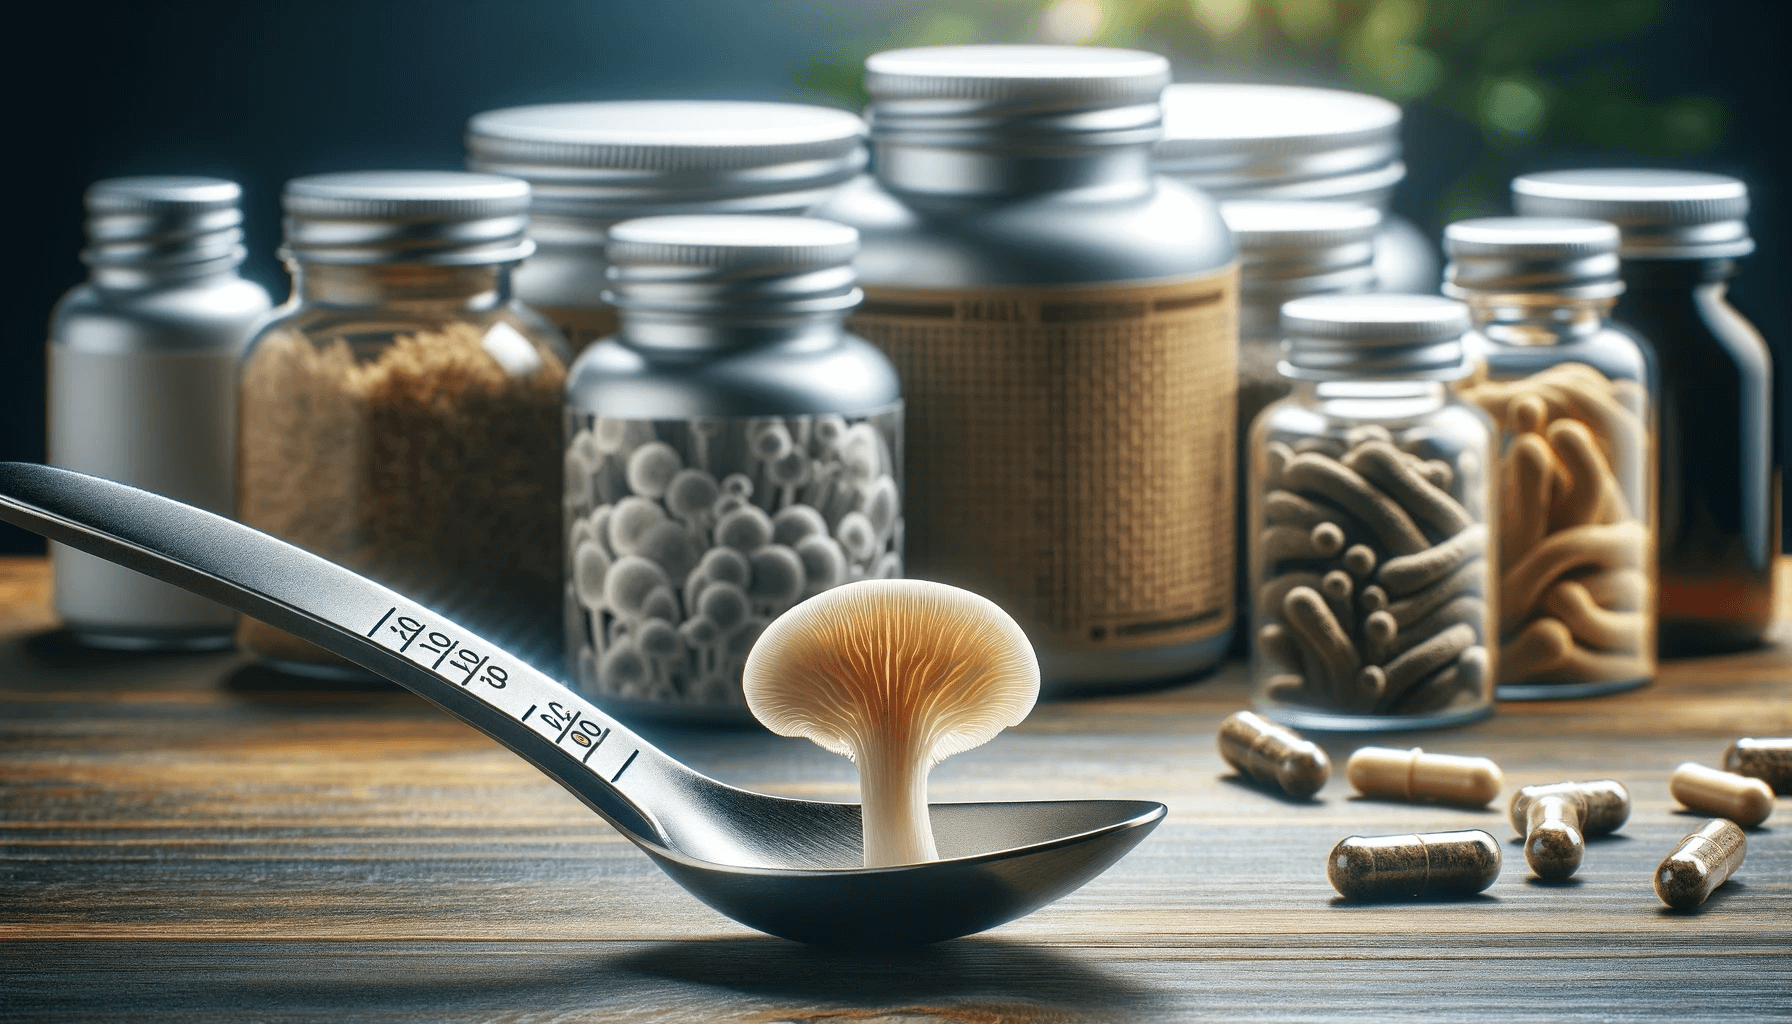 Precision dosage spoon with Lion's Mane mushroom extract against a background of daily supplement containers, emphasizing responsible consumption for optimal cognitive benefits